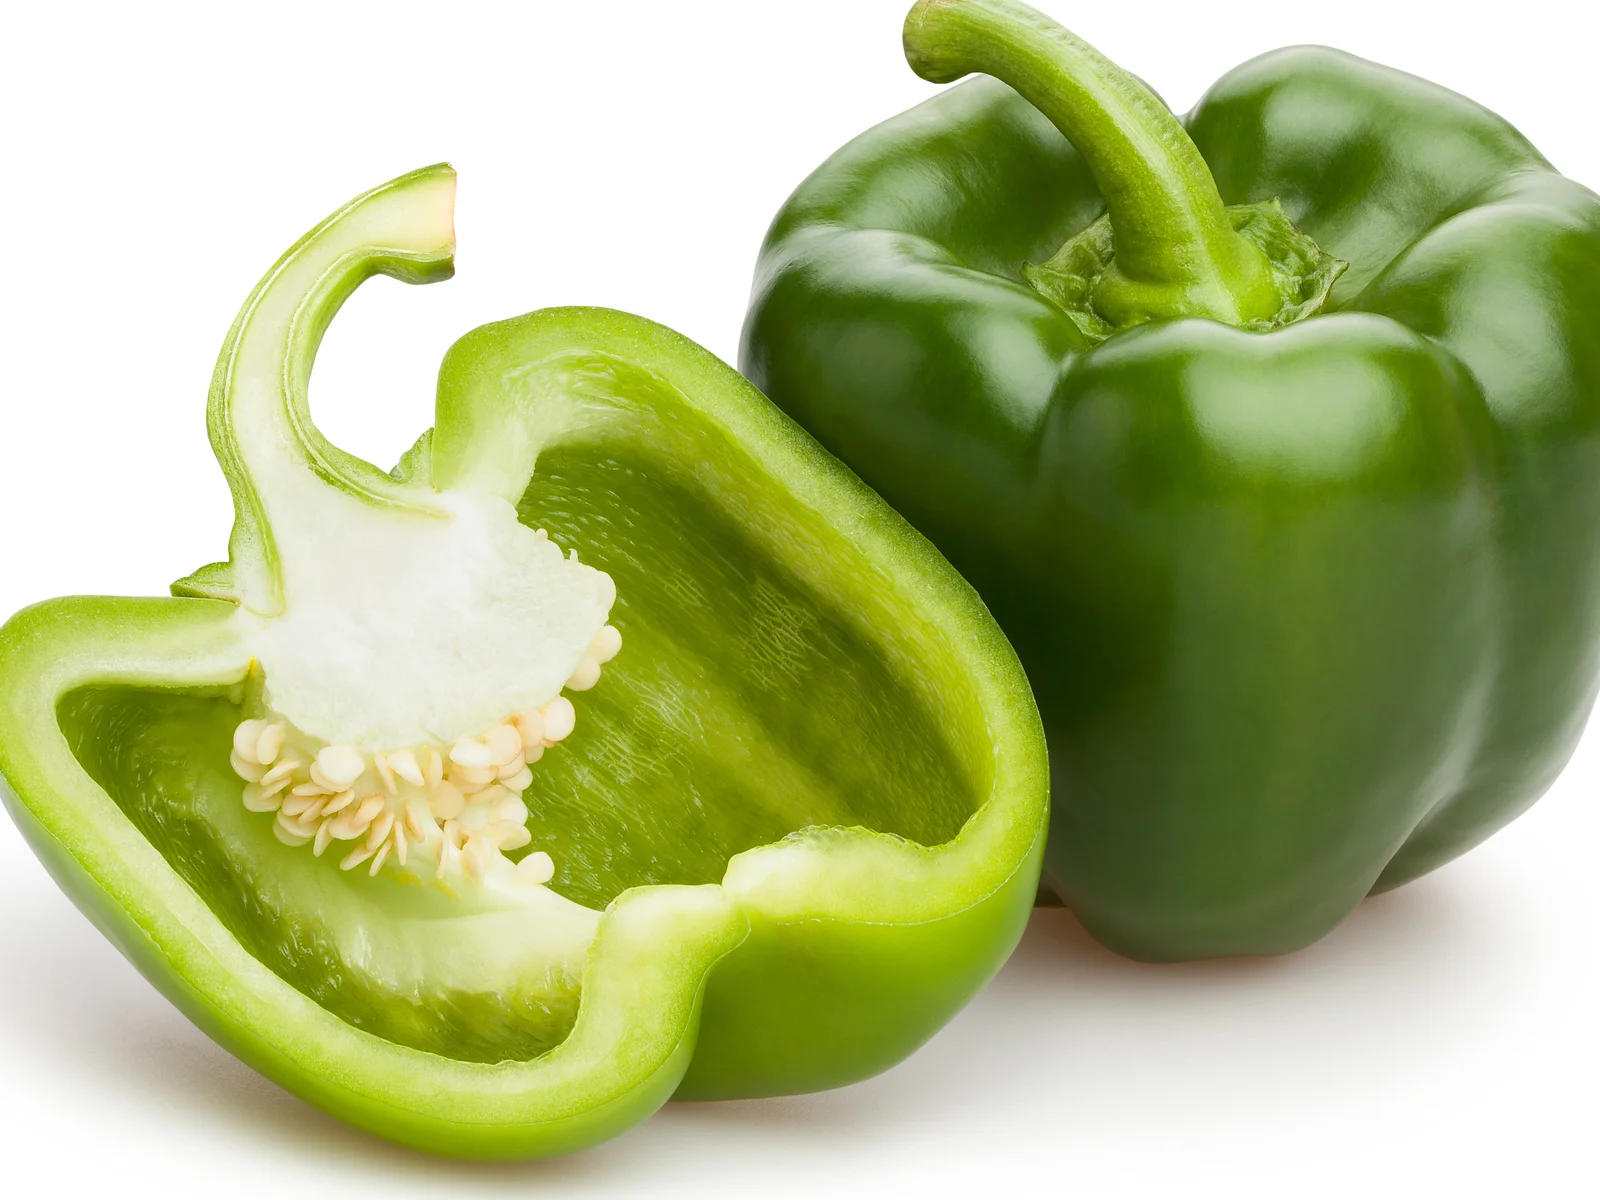 How To Prepare Green Pepper Seeds For Planting